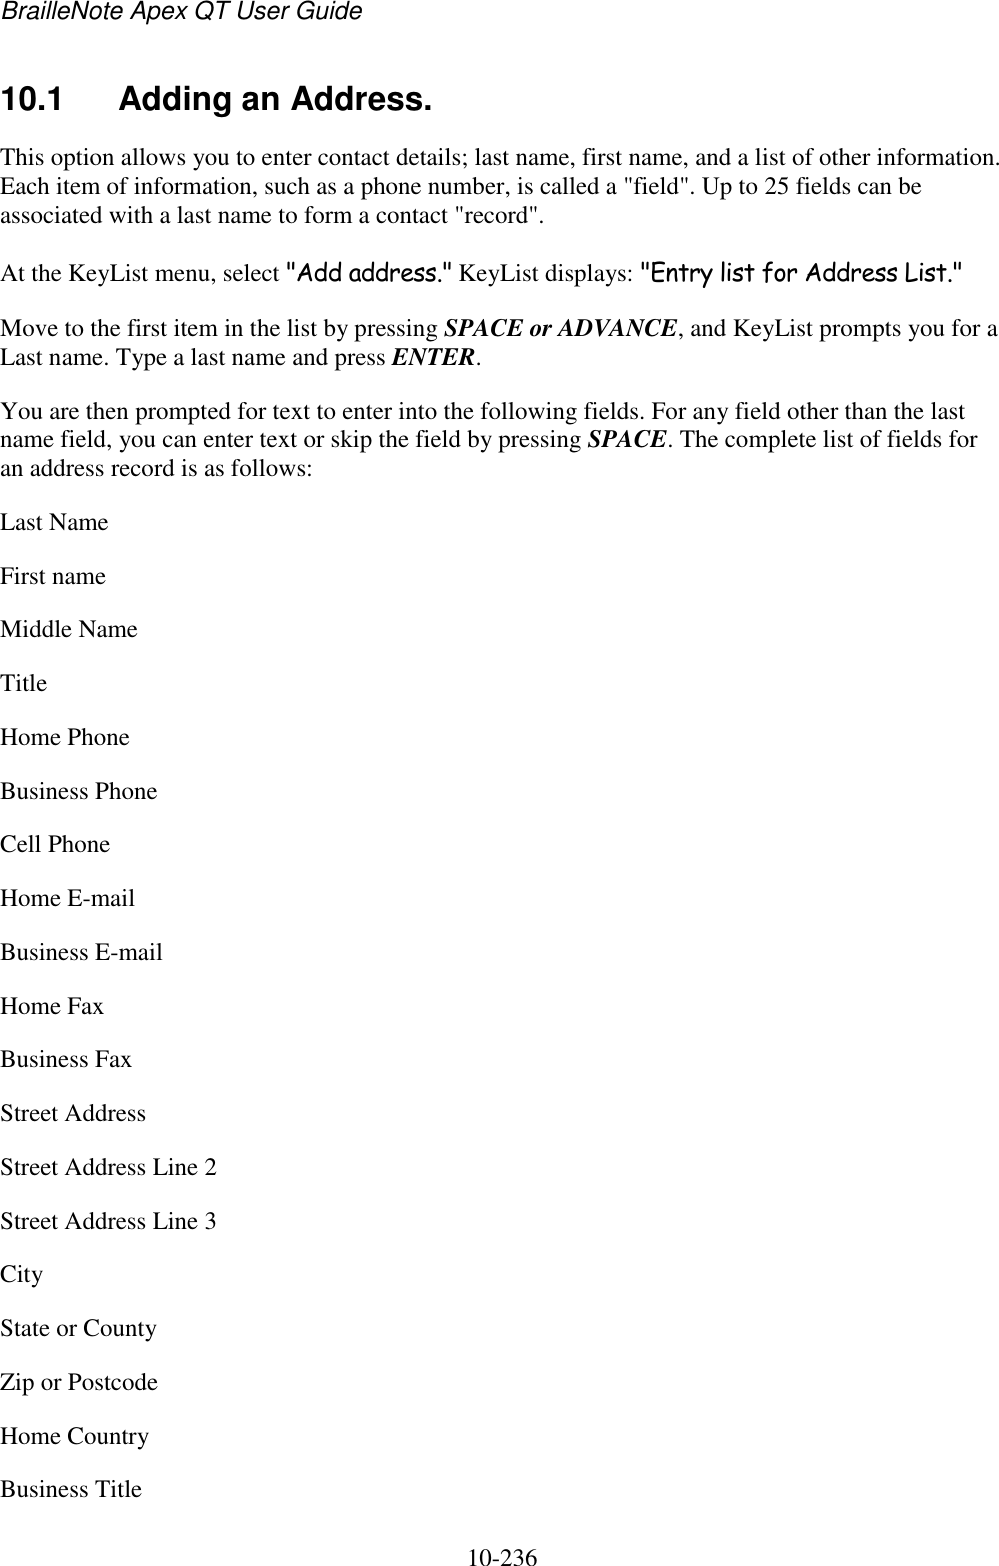 BrailleNote Apex QT User Guide  10-236   10.1  Adding an Address. This option allows you to enter contact details; last name, first name, and a list of other information. Each item of information, such as a phone number, is called a &quot;field&quot;. Up to 25 fields can be associated with a last name to form a contact &quot;record&quot;. At the KeyList menu, select &quot;Add address.&quot; KeyList displays: &quot;Entry list for Address List.&quot; Move to the first item in the list by pressing SPACE or ADVANCE, and KeyList prompts you for a Last name. Type a last name and press ENTER. You are then prompted for text to enter into the following fields. For any field other than the last name field, you can enter text or skip the field by pressing SPACE. The complete list of fields for an address record is as follows: Last Name First name Middle Name Title Home Phone Business Phone Cell Phone Home E-mail Business E-mail Home Fax Business Fax Street Address Street Address Line 2 Street Address Line 3 City State or County Zip or Postcode Home Country Business Title 